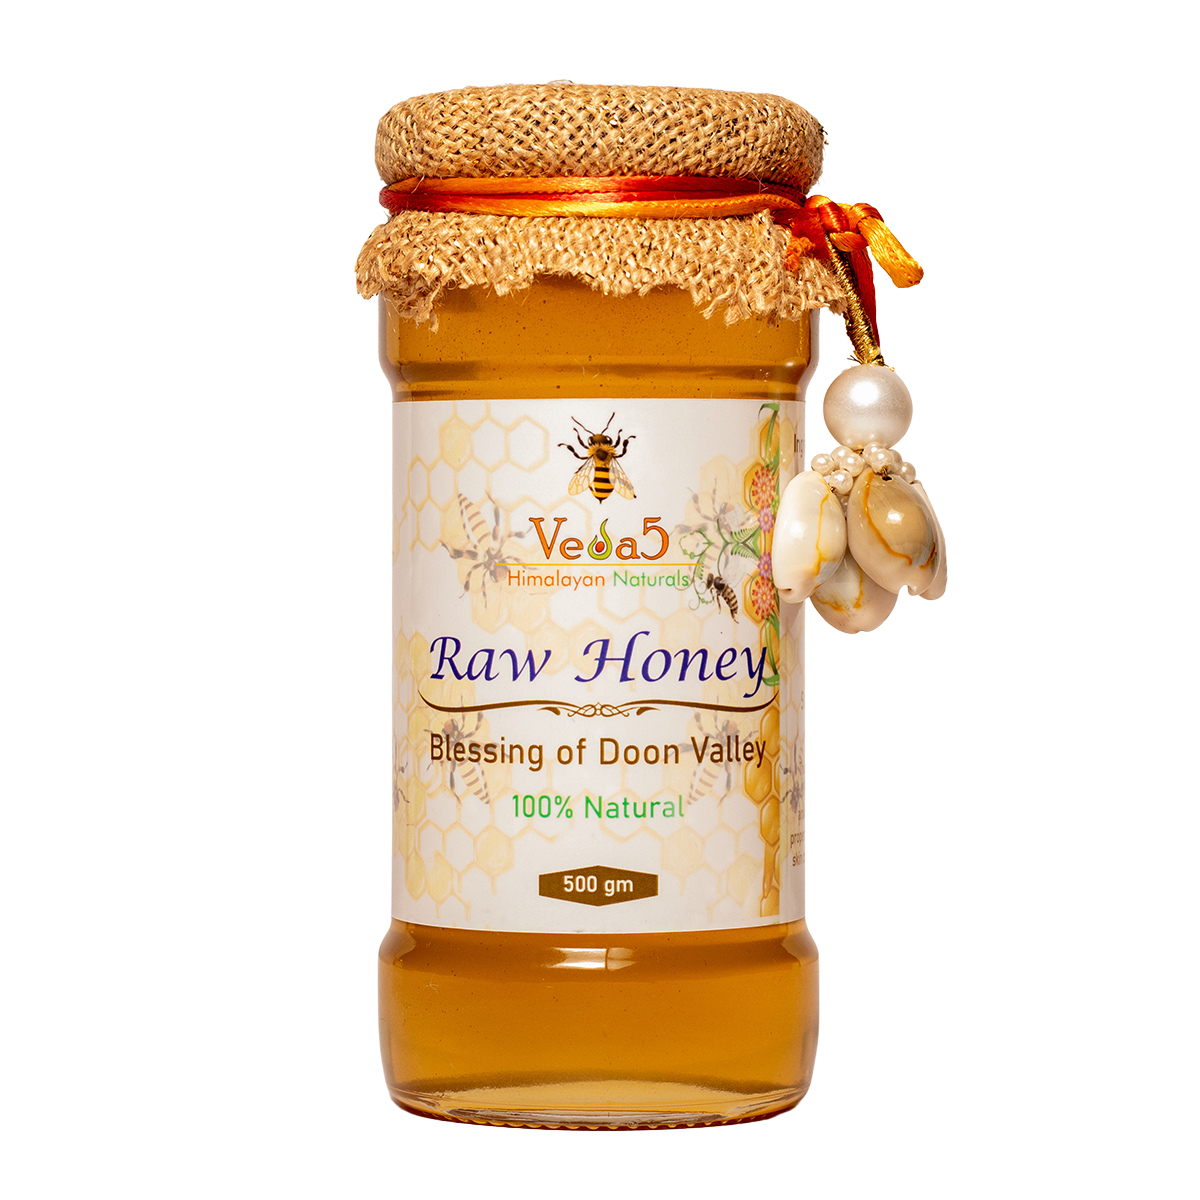 Veda5 Raw Honey 100 Natural No Added Sugar Blessings of Doon Valley 500gm Frontside